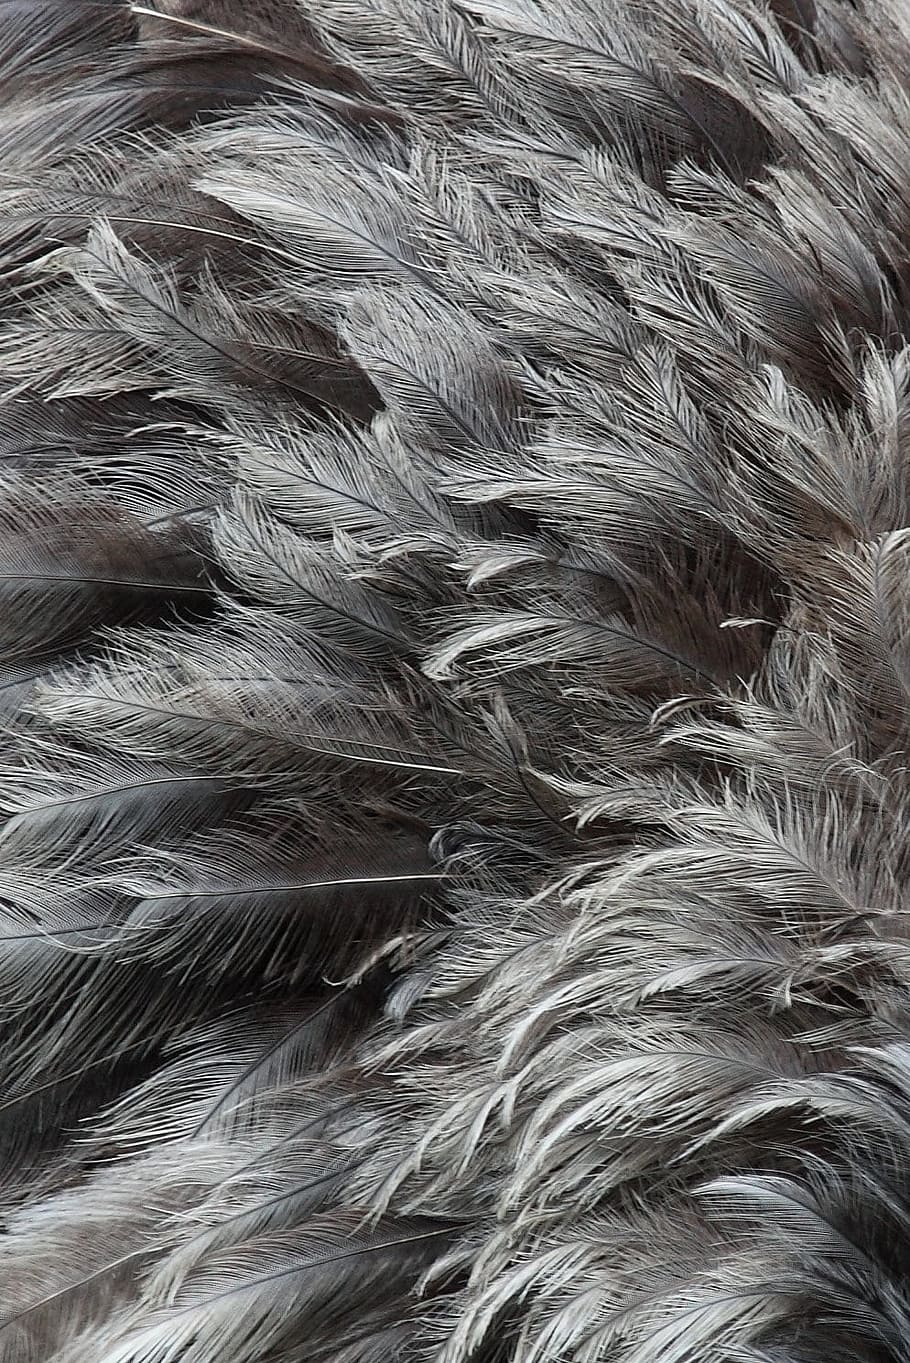 gray feathers, animal, background, bird, black, feather, many, natural, nature, pattern